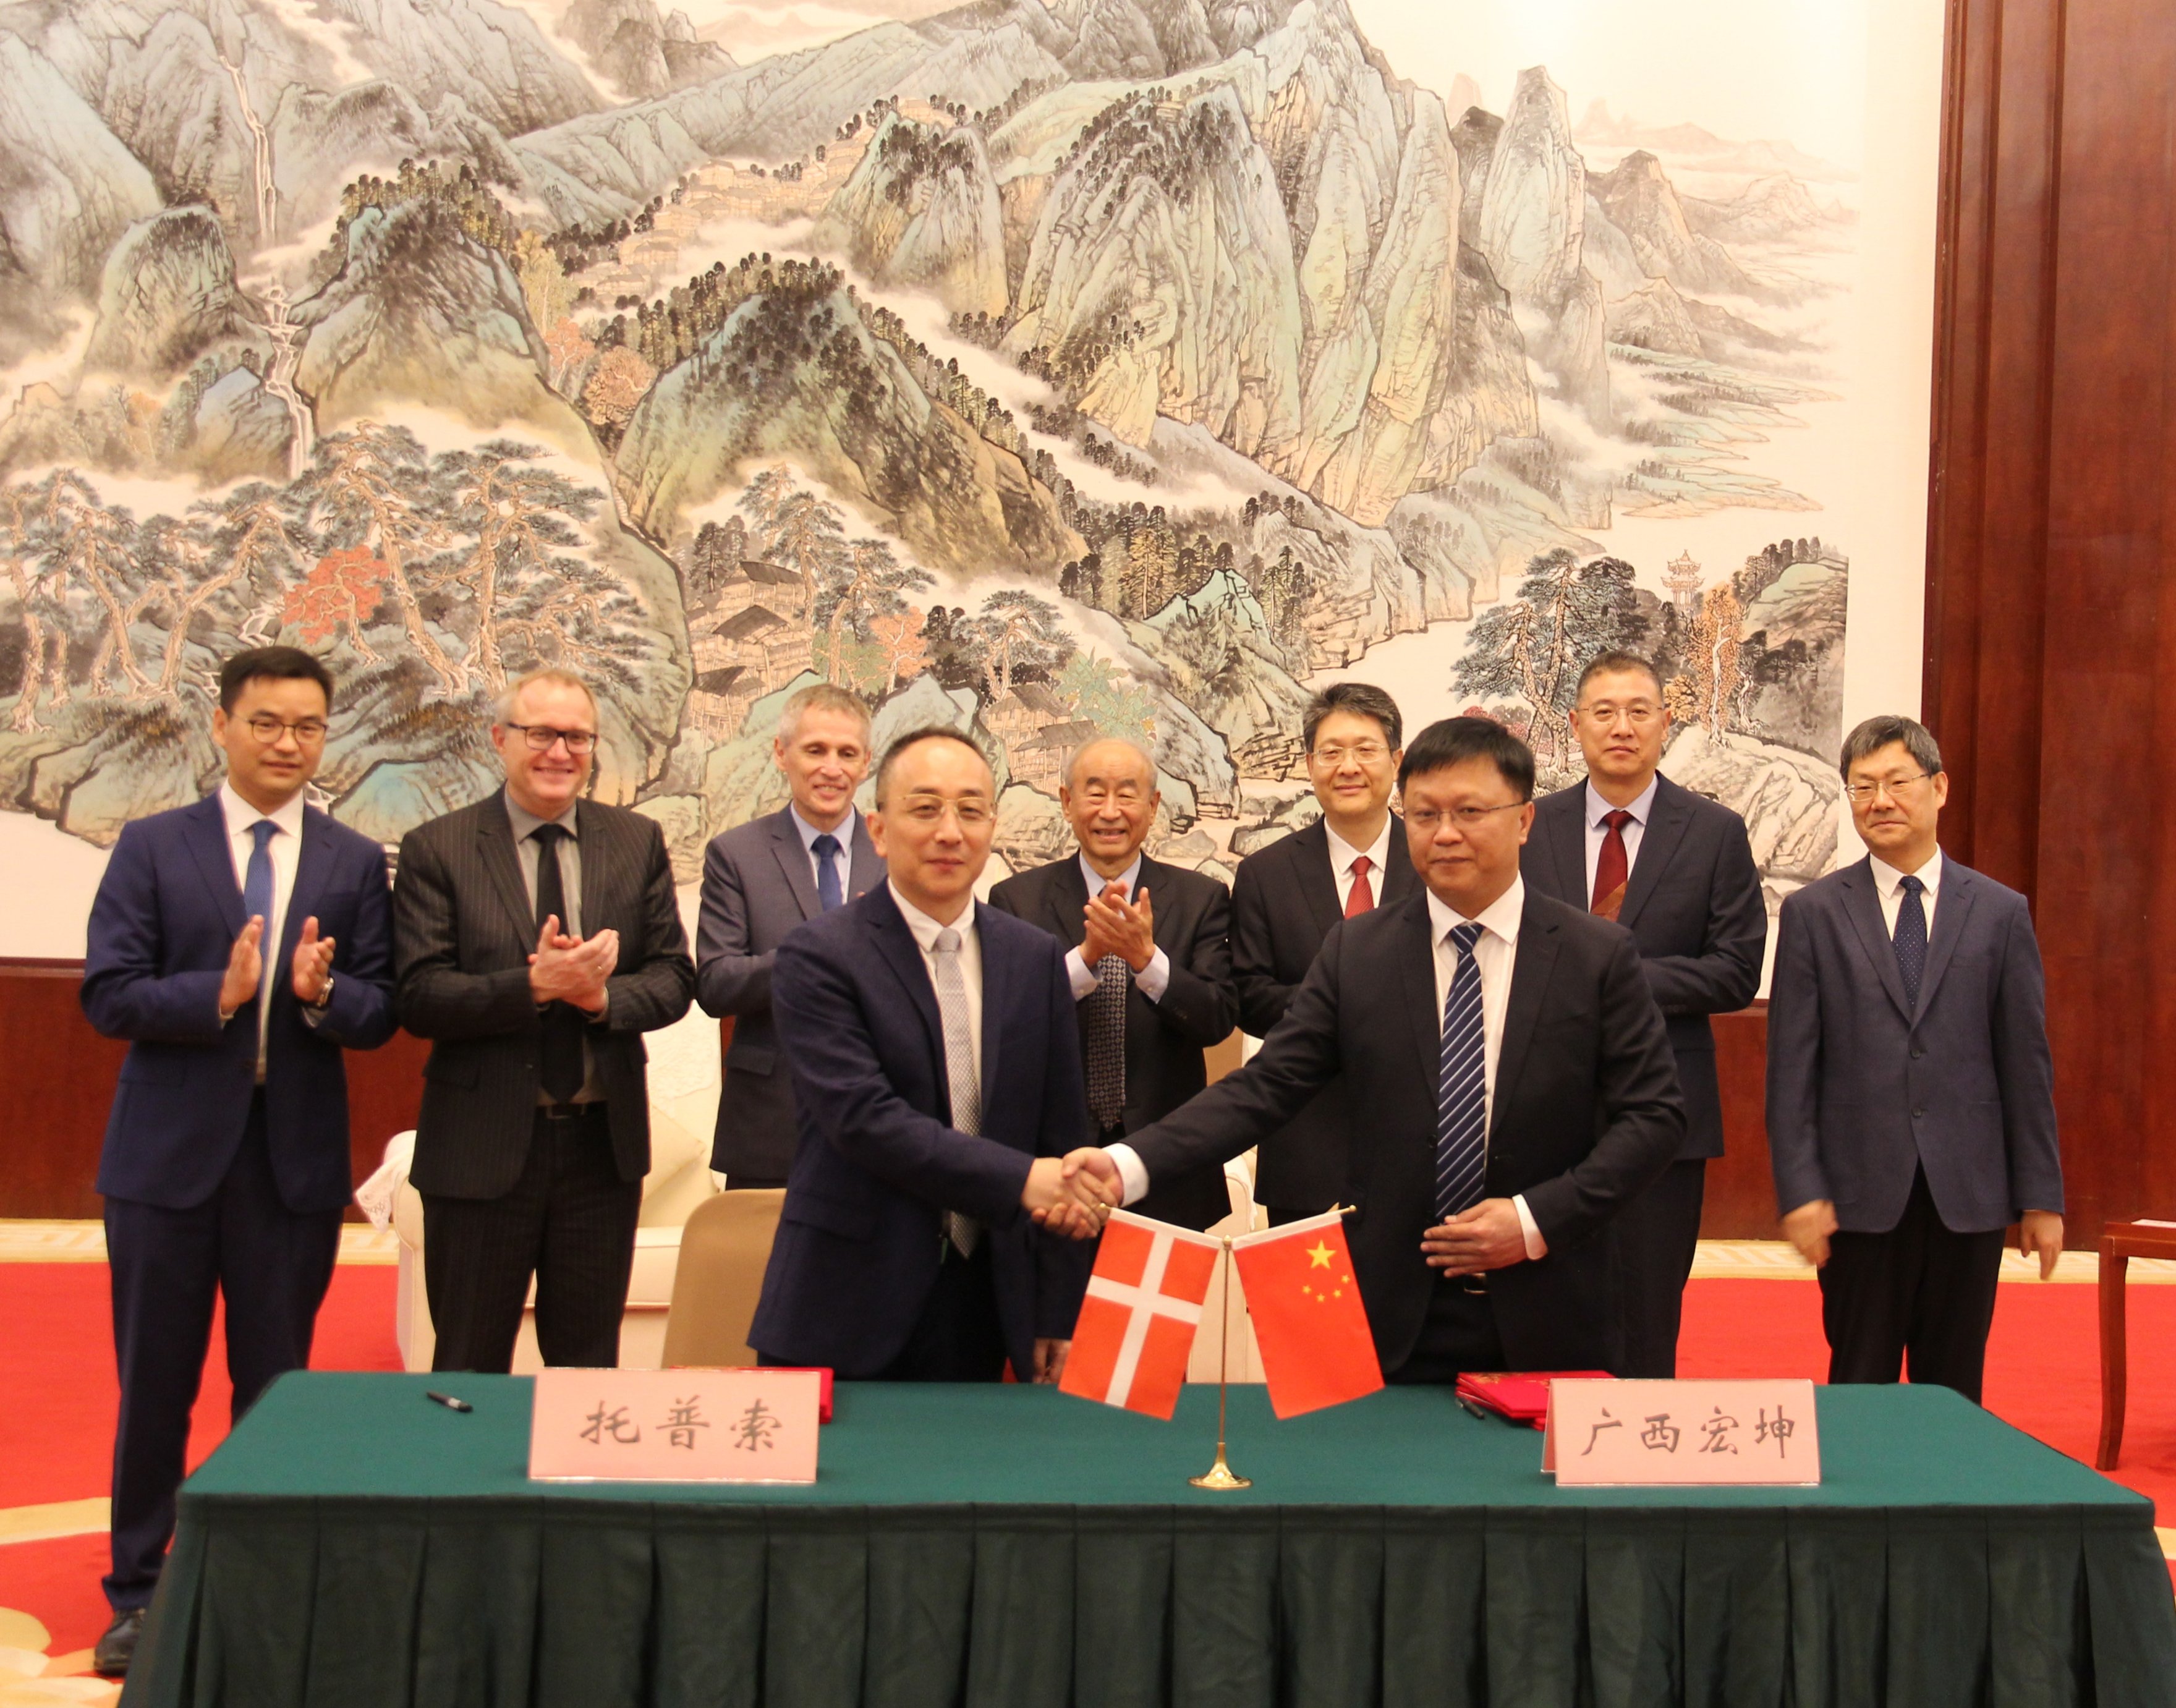 The agreement was signed by Dajun Yang, Managing Director Topsoe, China (front left) and by Jiaming Liu, General Manager of Guangxi Hongkun Biomass (front right).